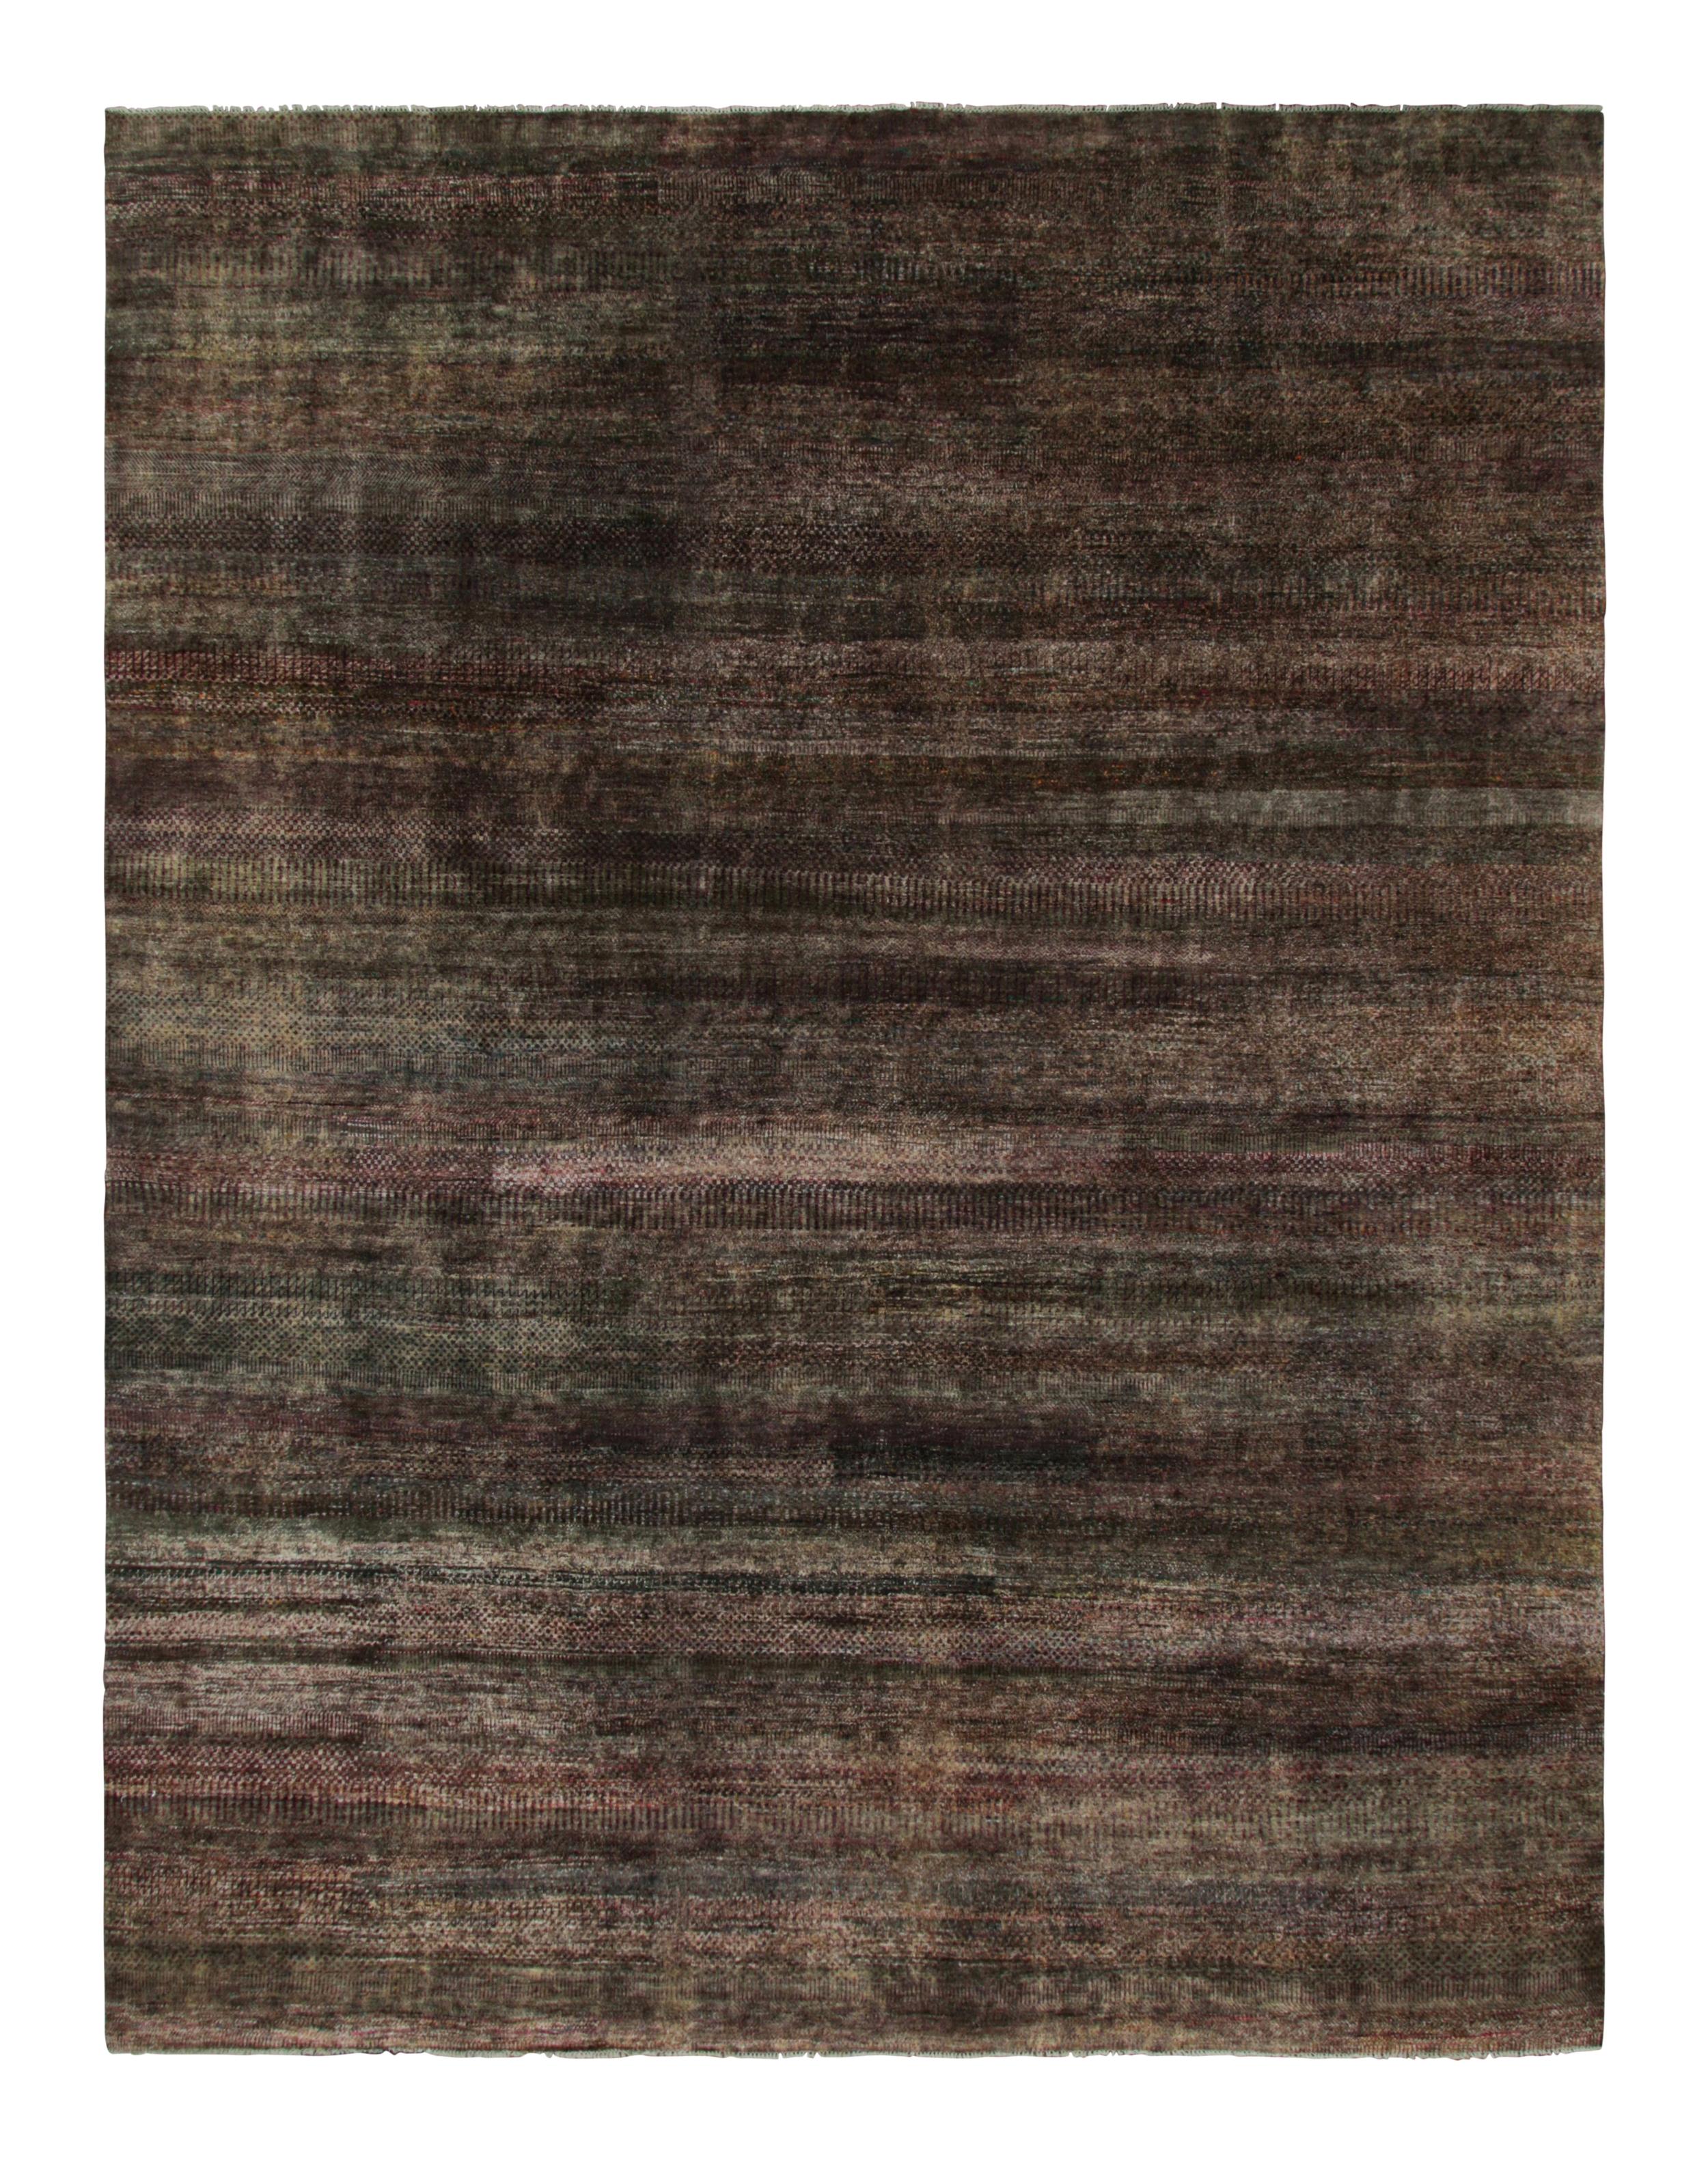 Indian Rug & Kilim’s Modern Textural Rug in Tones of Plum and Green For Sale